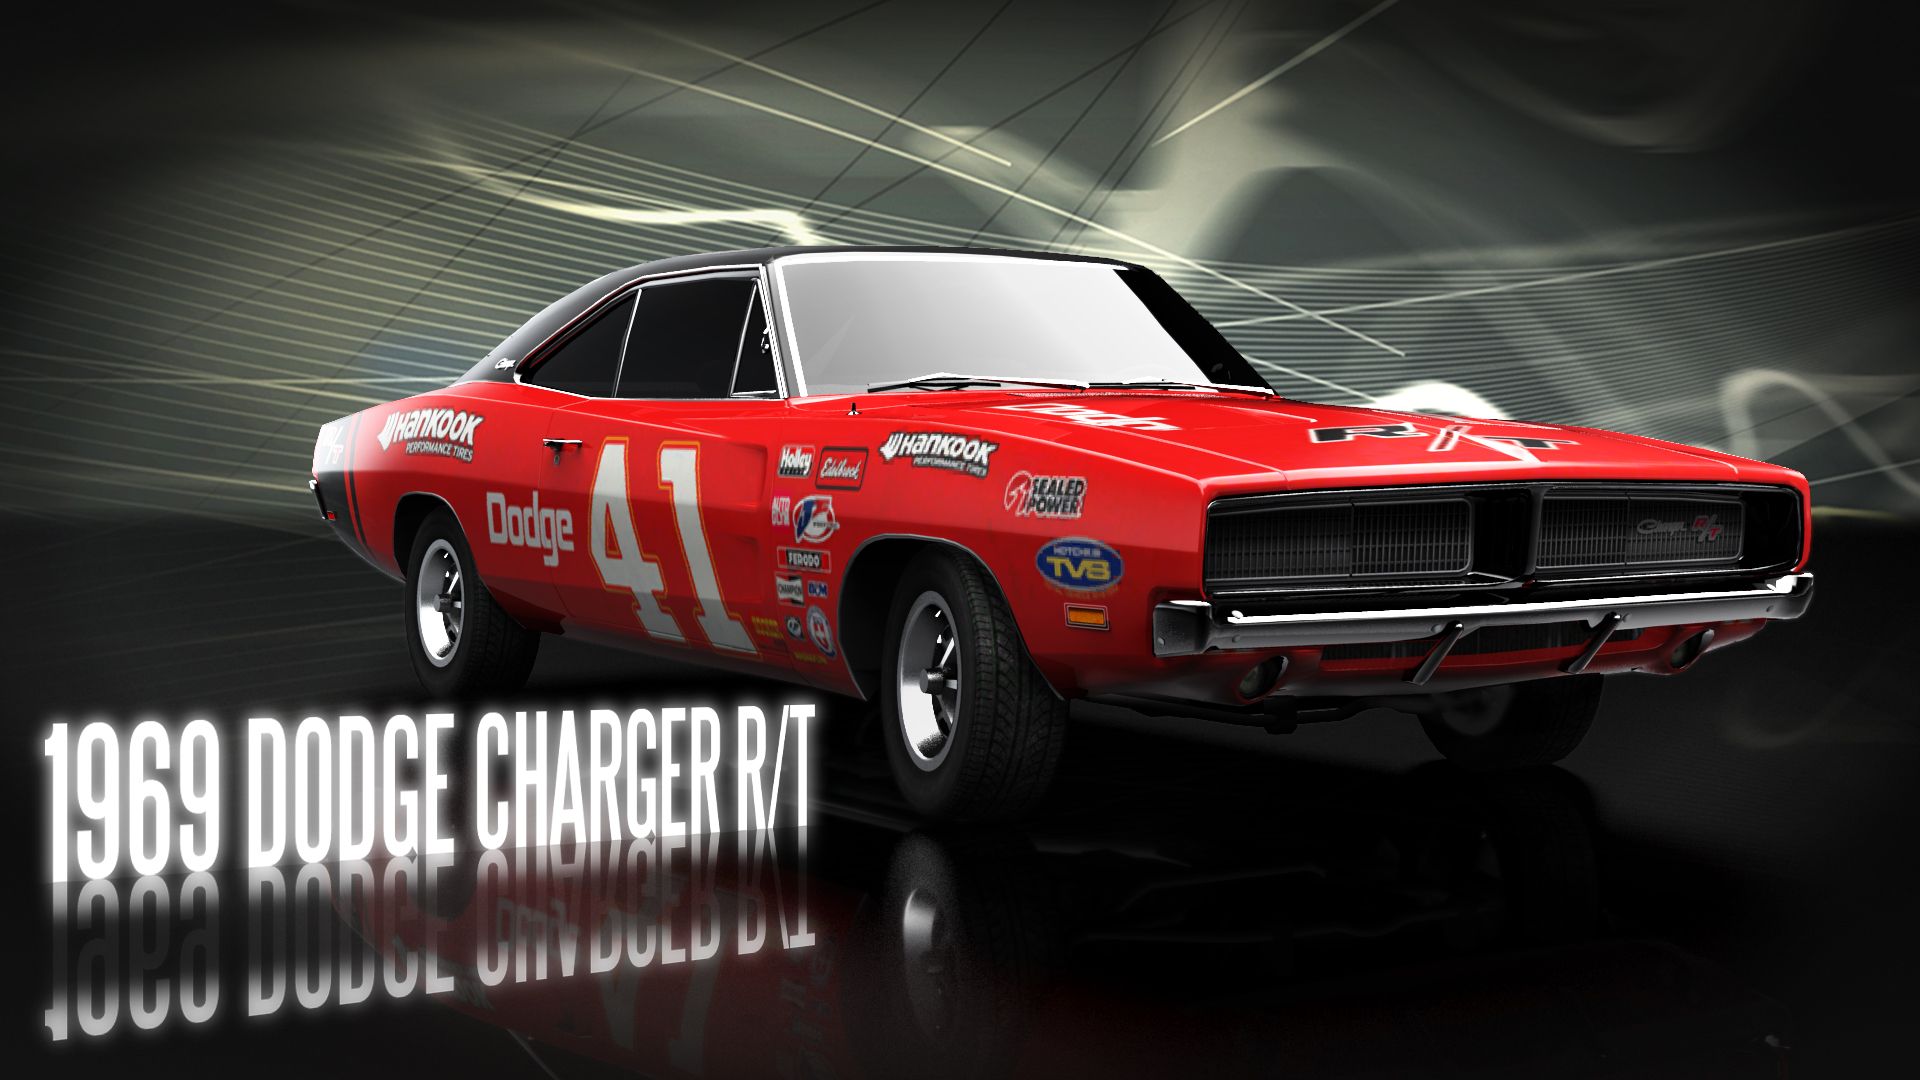 HD wallpaper, Charger, Dodge, 1969